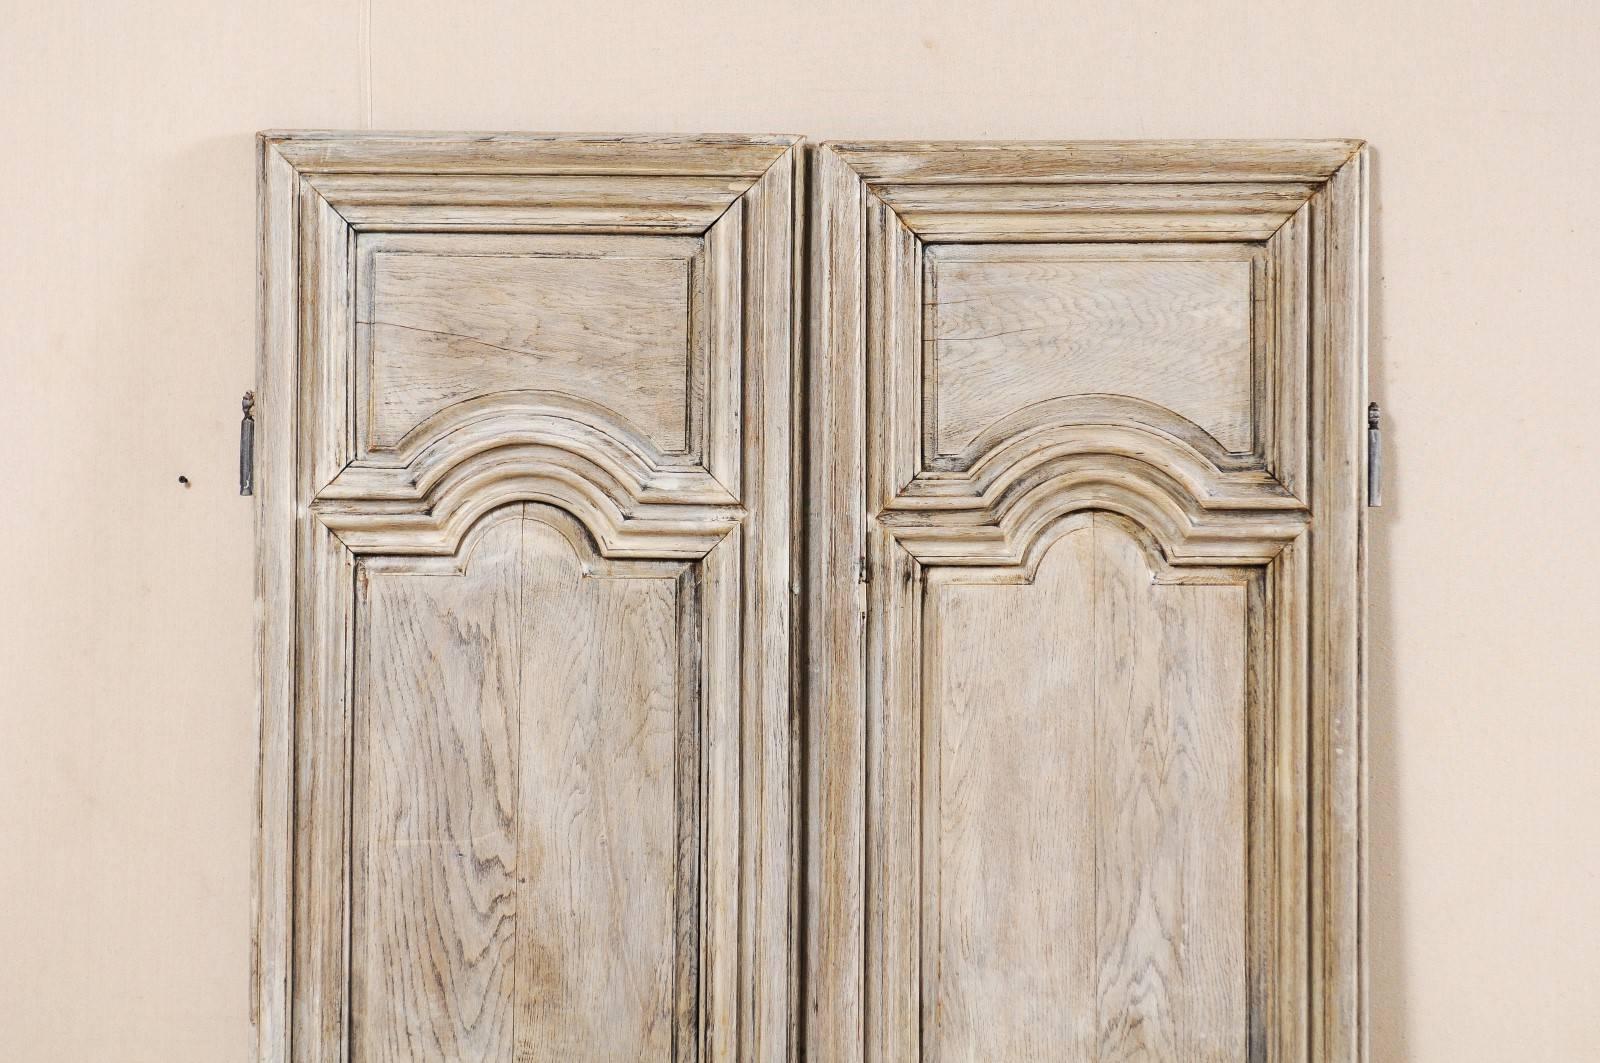 Carved Pair of Lovely 19th Century French Doors with a Painted Pale Grey Wash